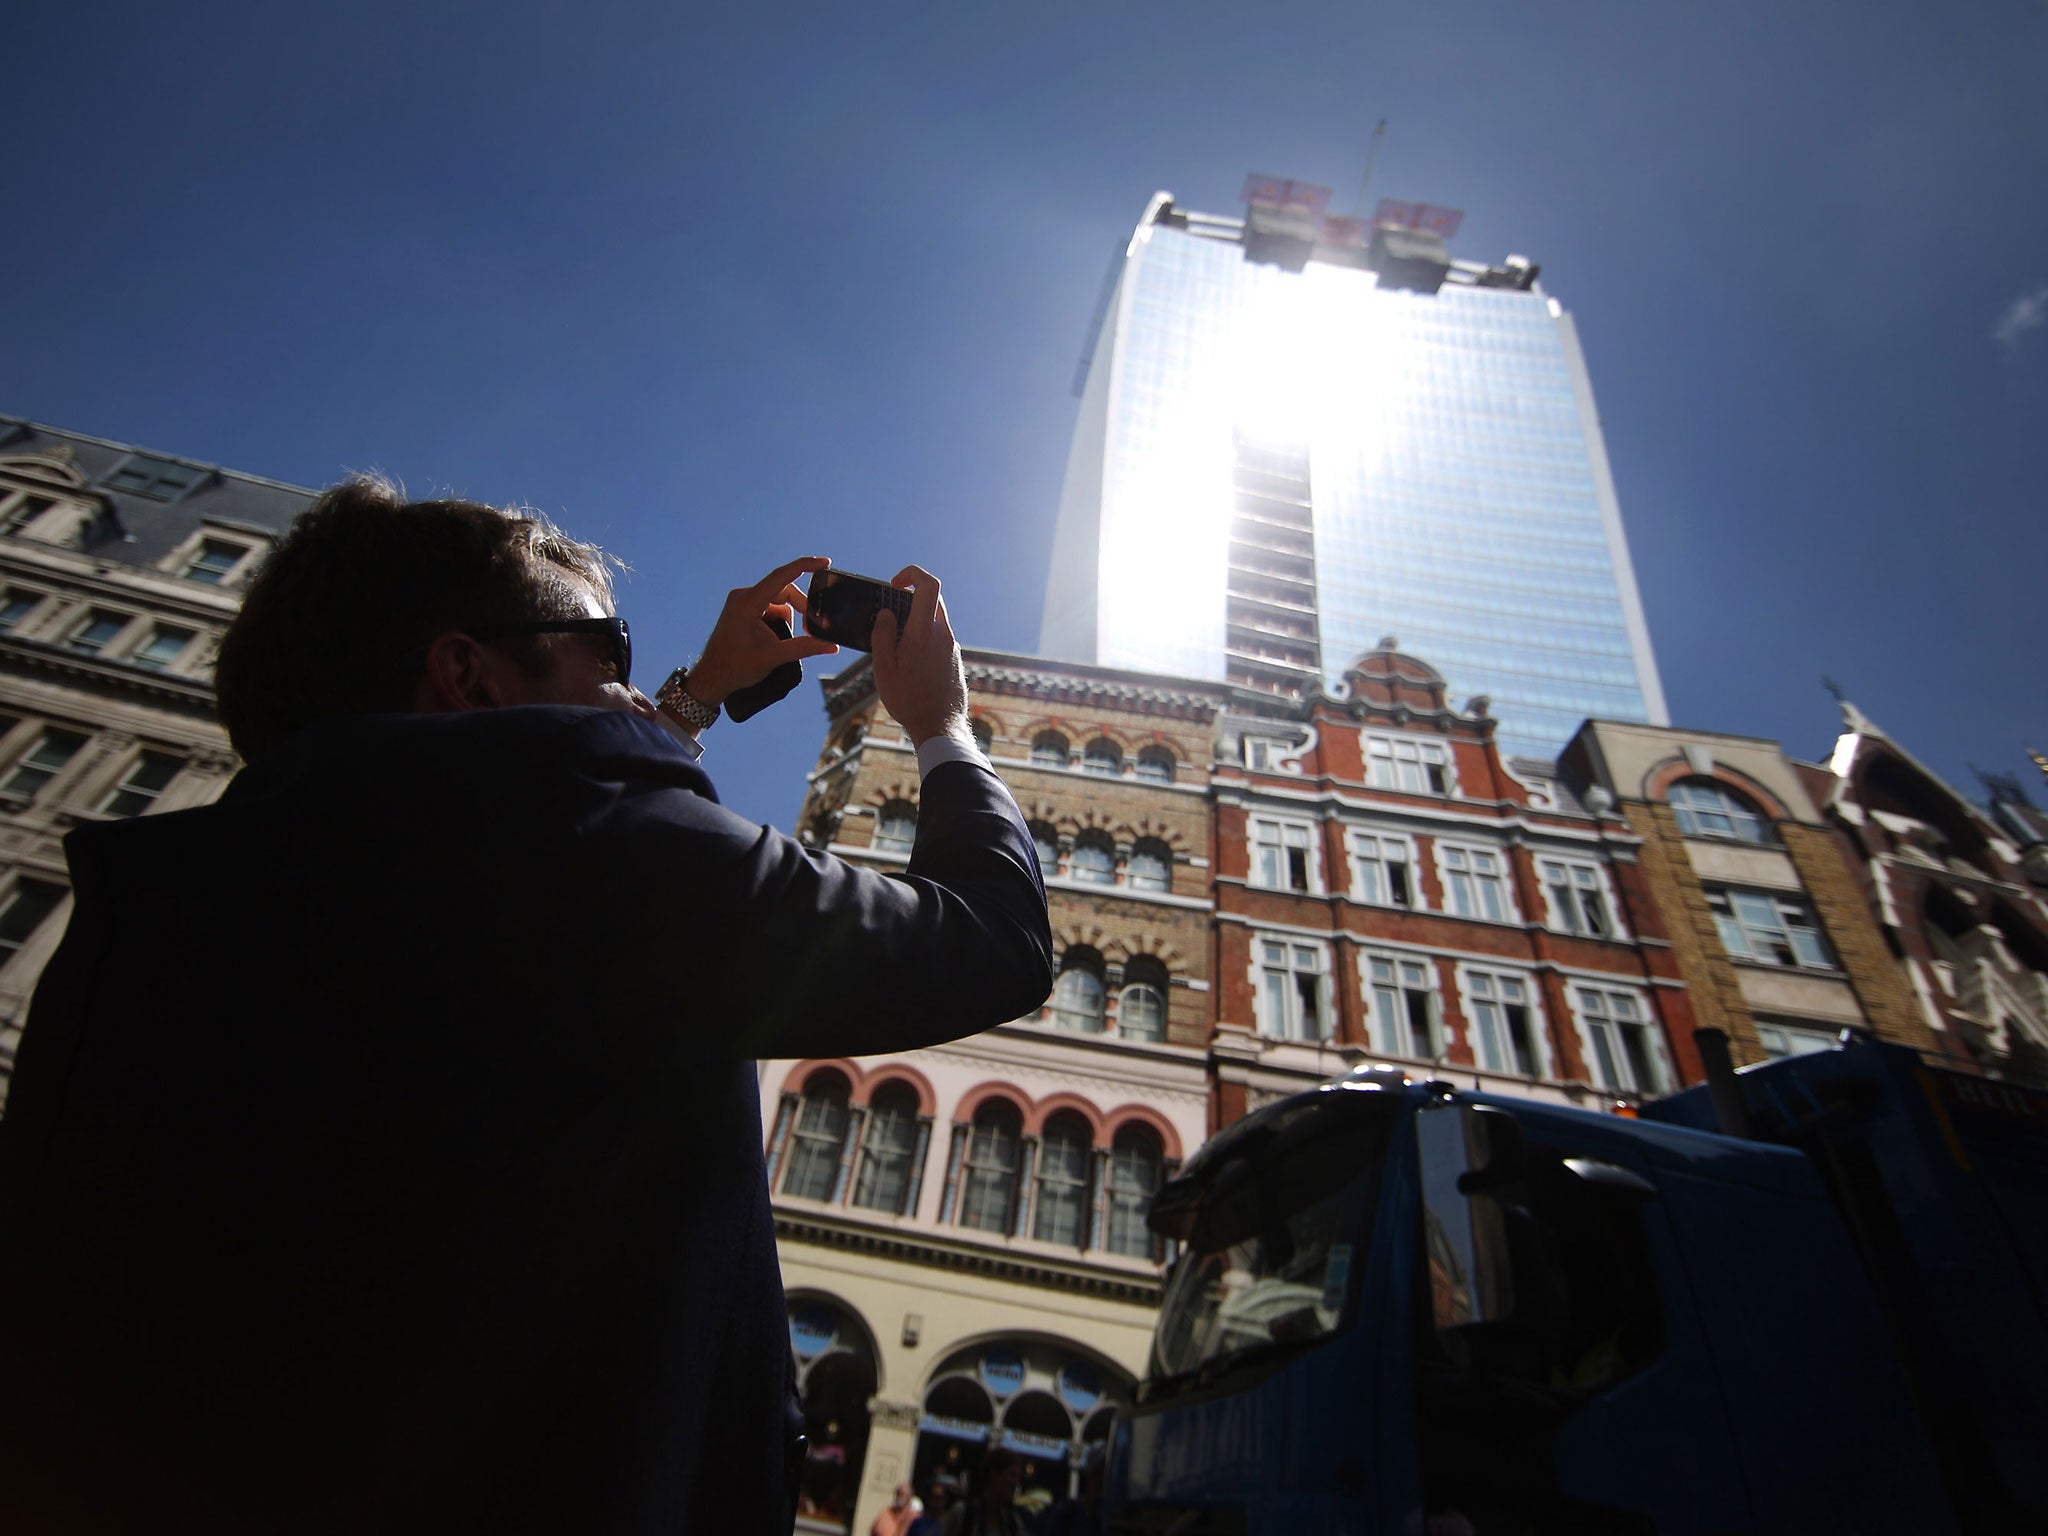 A man takes a photograph as the sun glares down from the Walkie Talkie building.